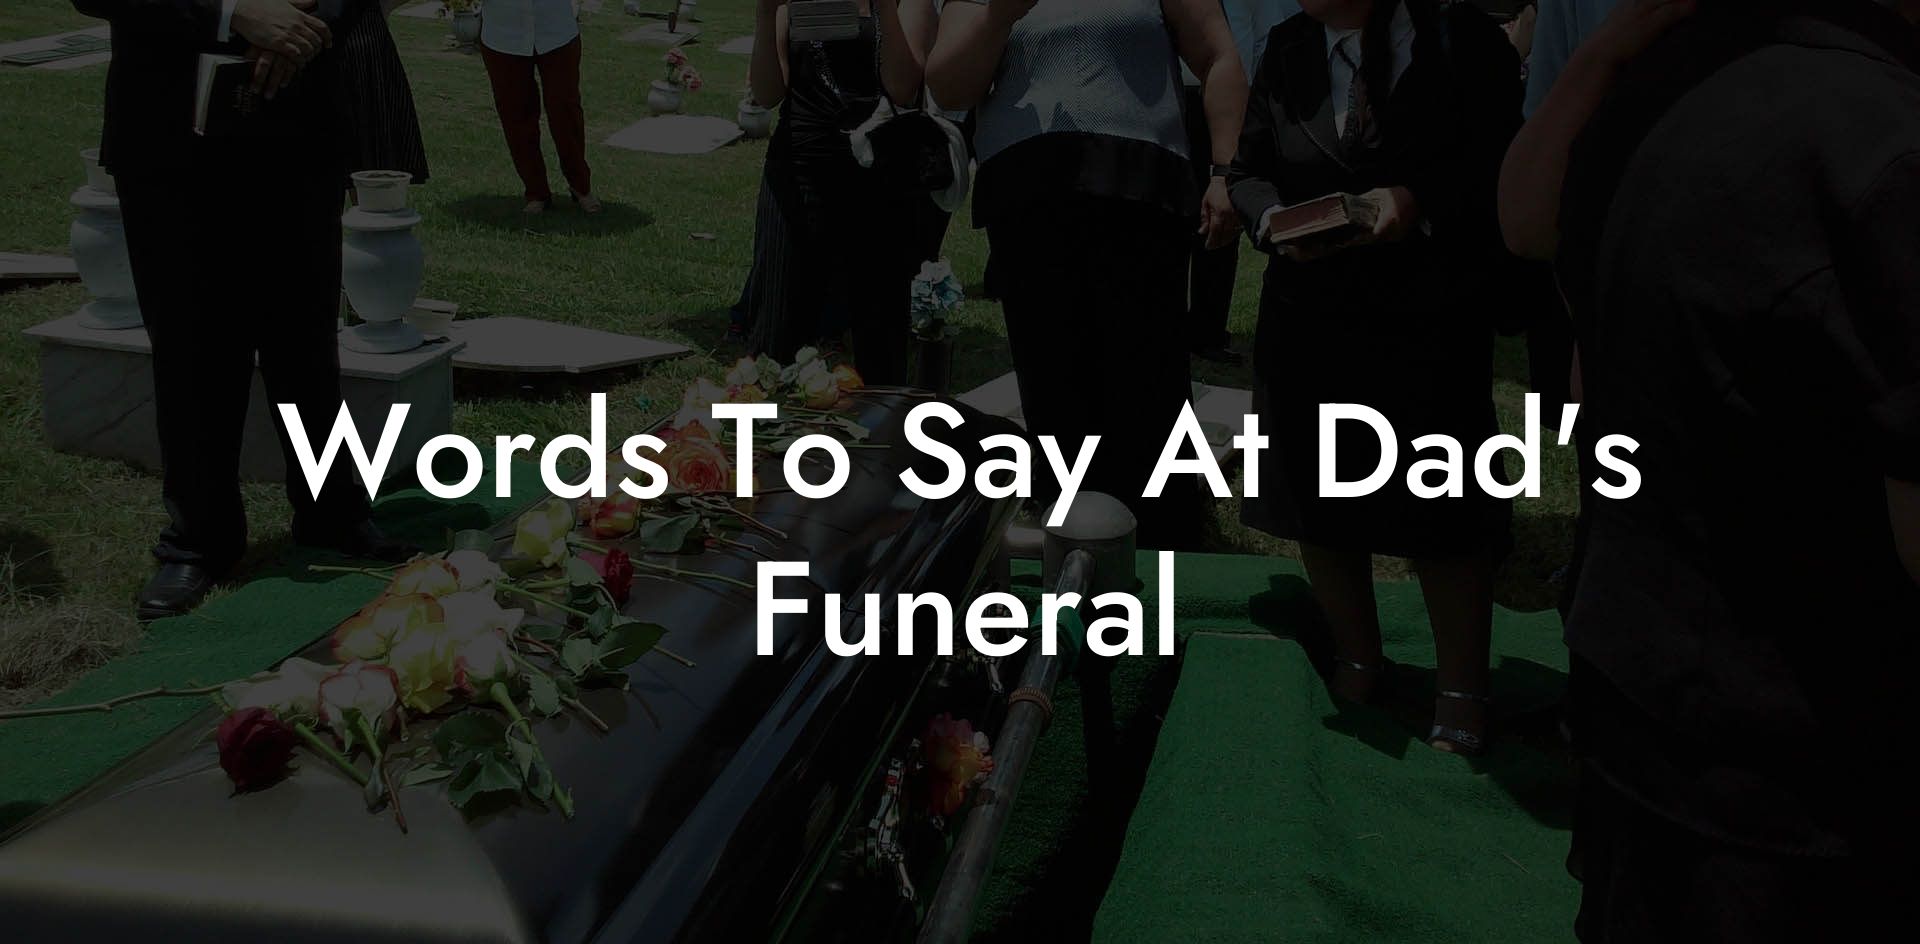 Words To Say At Dad's Funeral